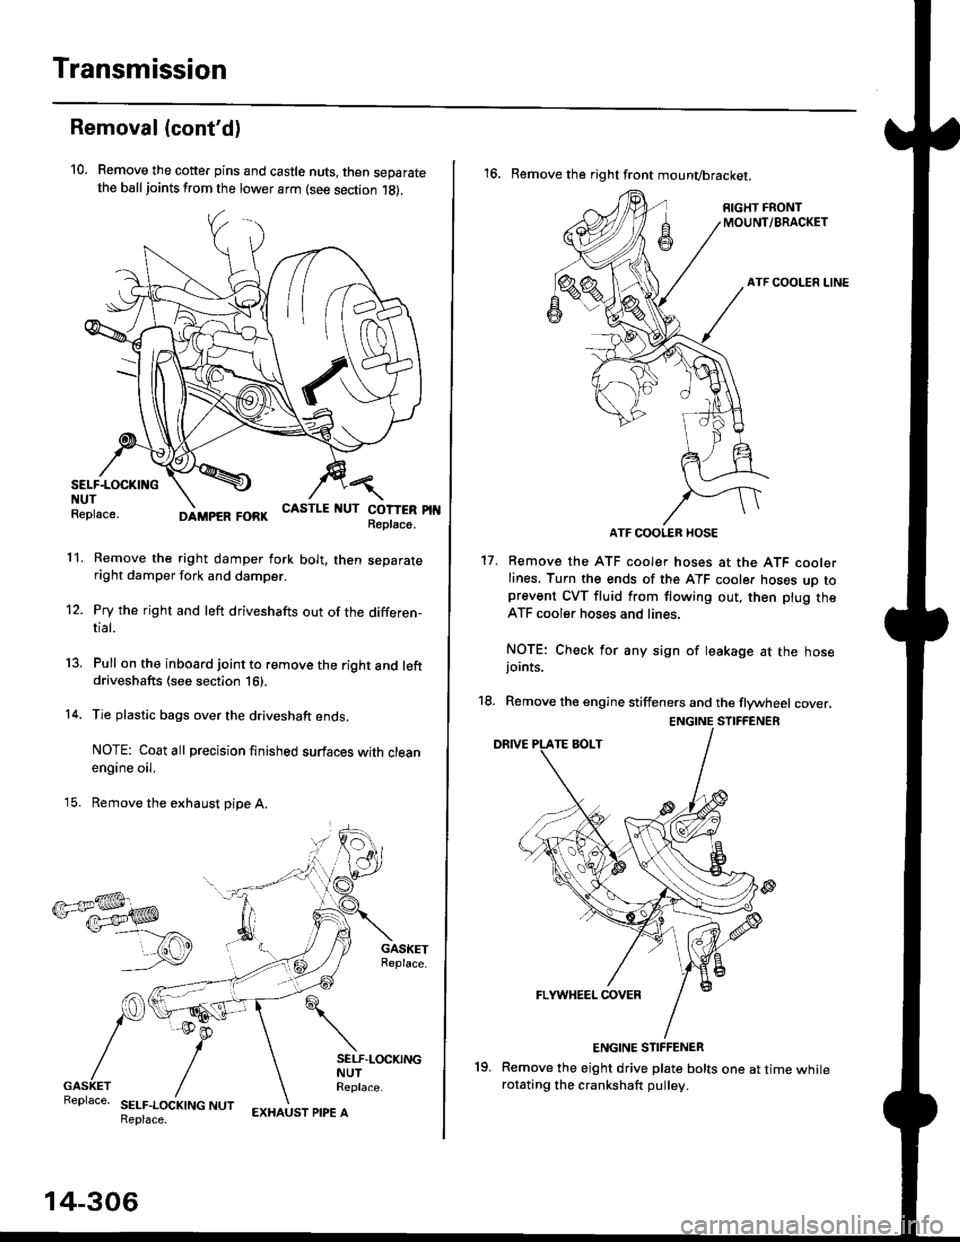 HONDA CIVIC 1998 6.G Workshop Manual Transmission
Removal (contd)
10. Remove the cotte. pins and castle nuts, then separatethe ball joints from the lower arm (see section 1g).
SELF-LOCKING  -=V,
NUT \Replace. oitupea rOax
Remove the rig